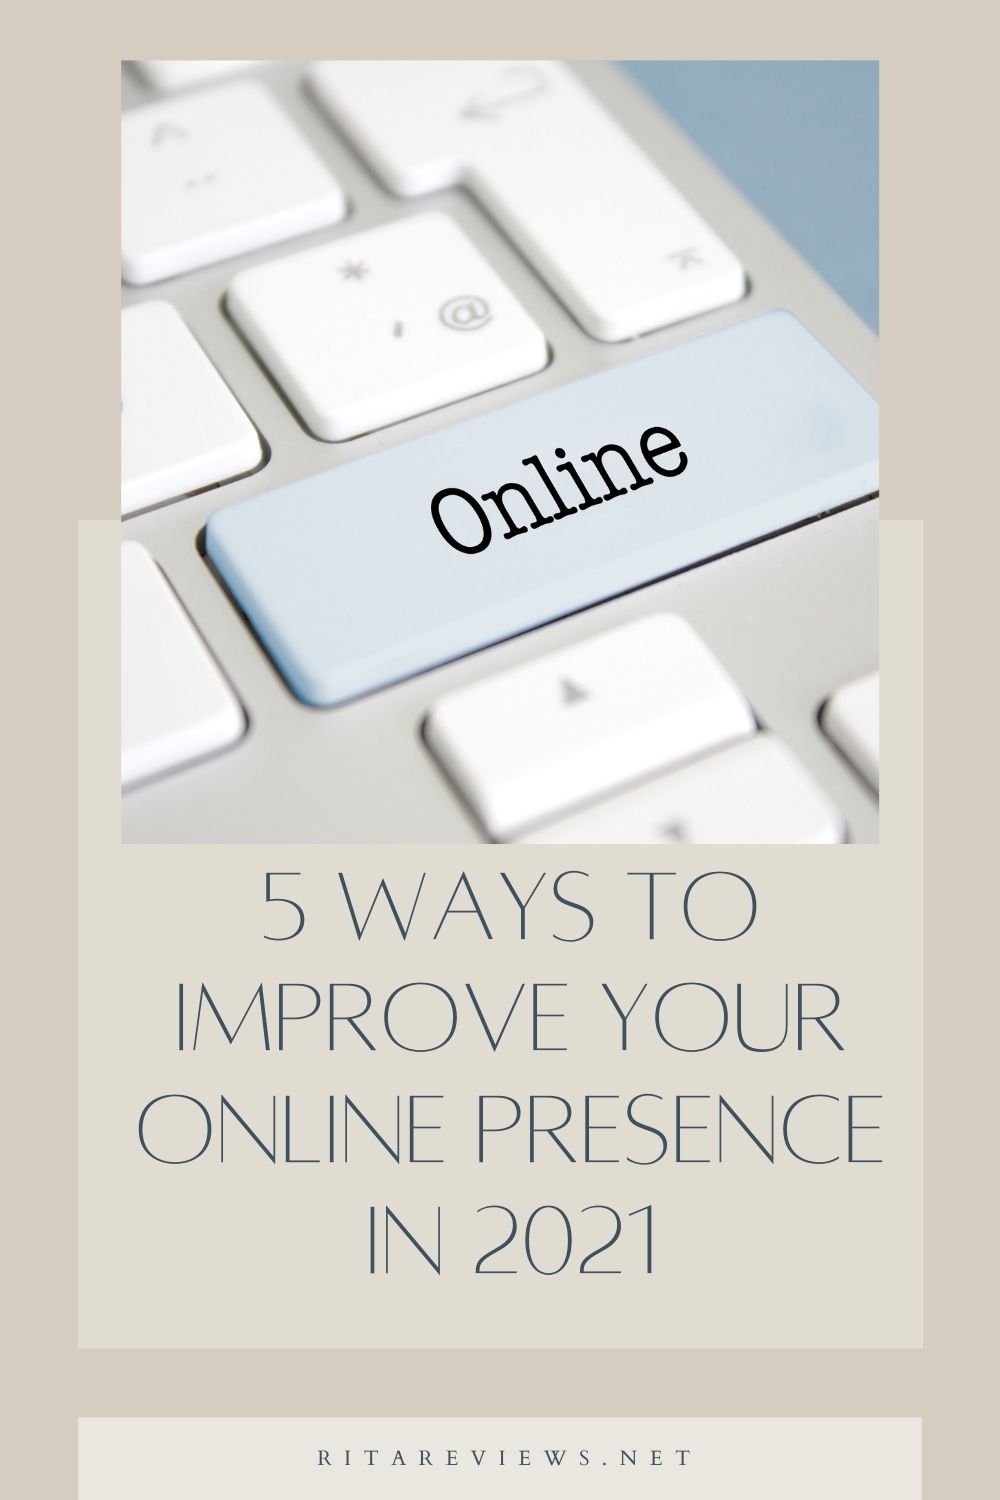 5 Ways To Improve Your Online Presence In 2021